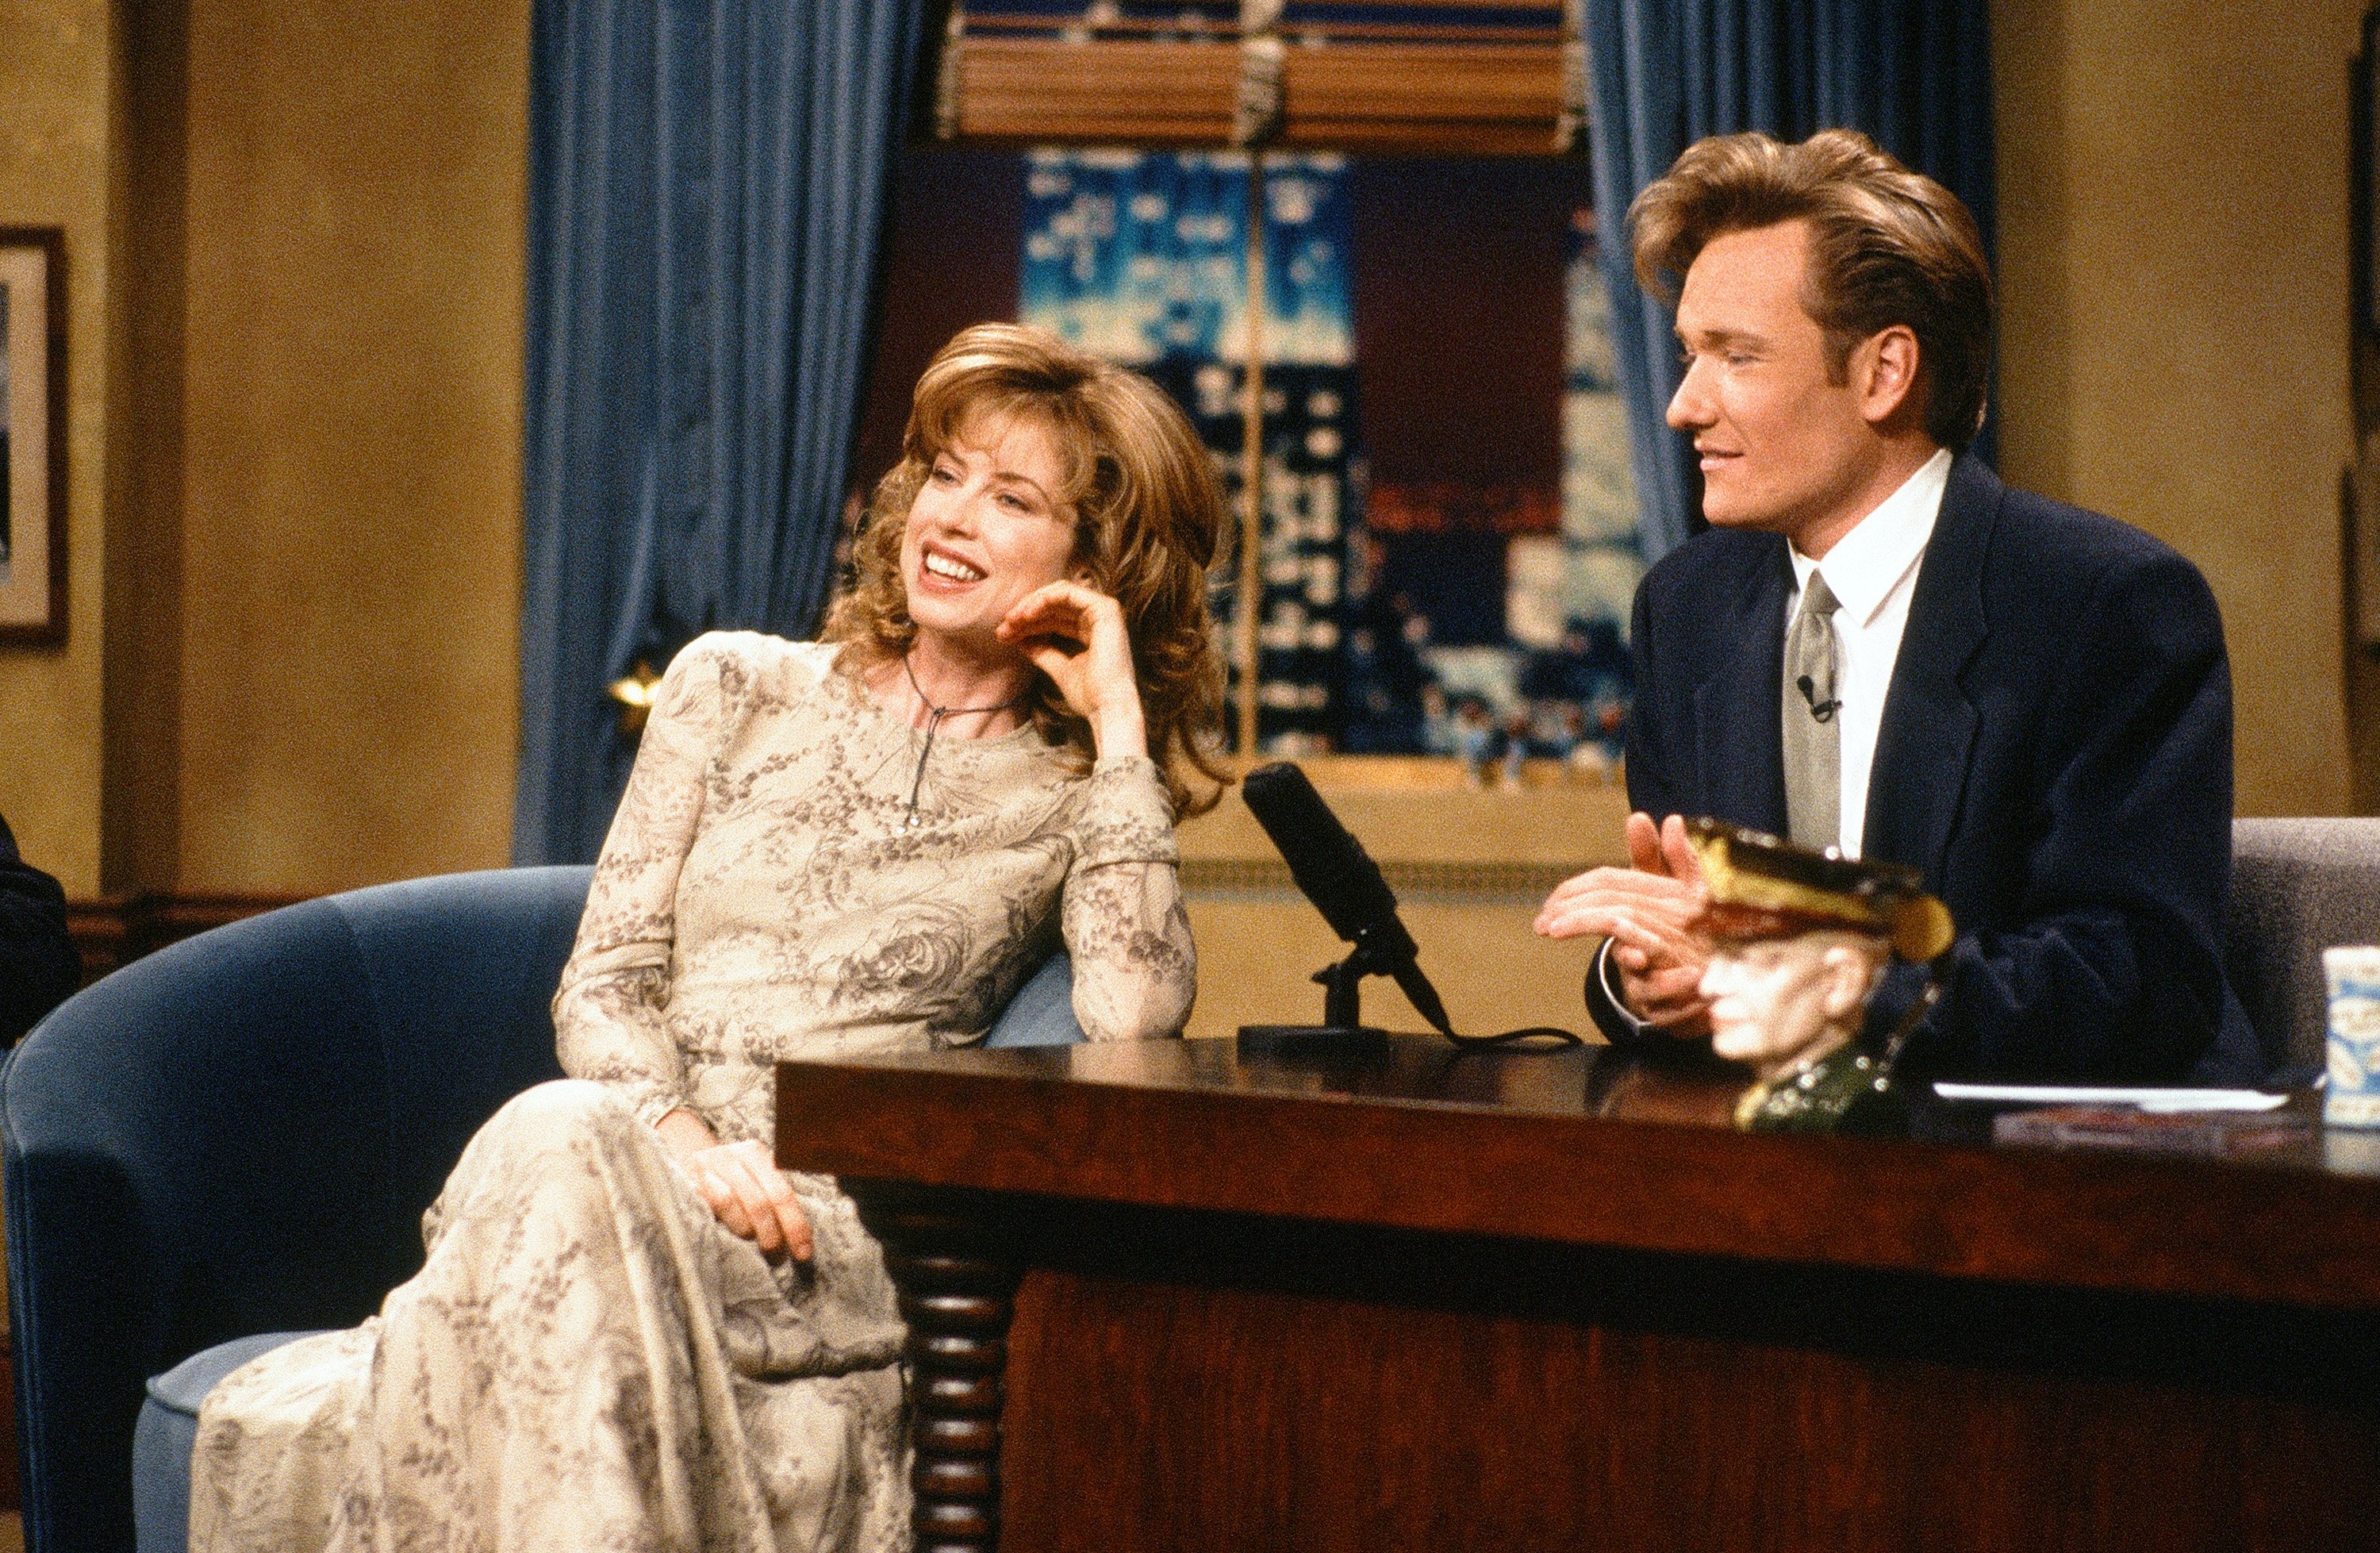   Julianne Phillips and Conan O'Brien on “Late Night With Conan O’Brien”on September 21, 1993. | Source: Getty Images